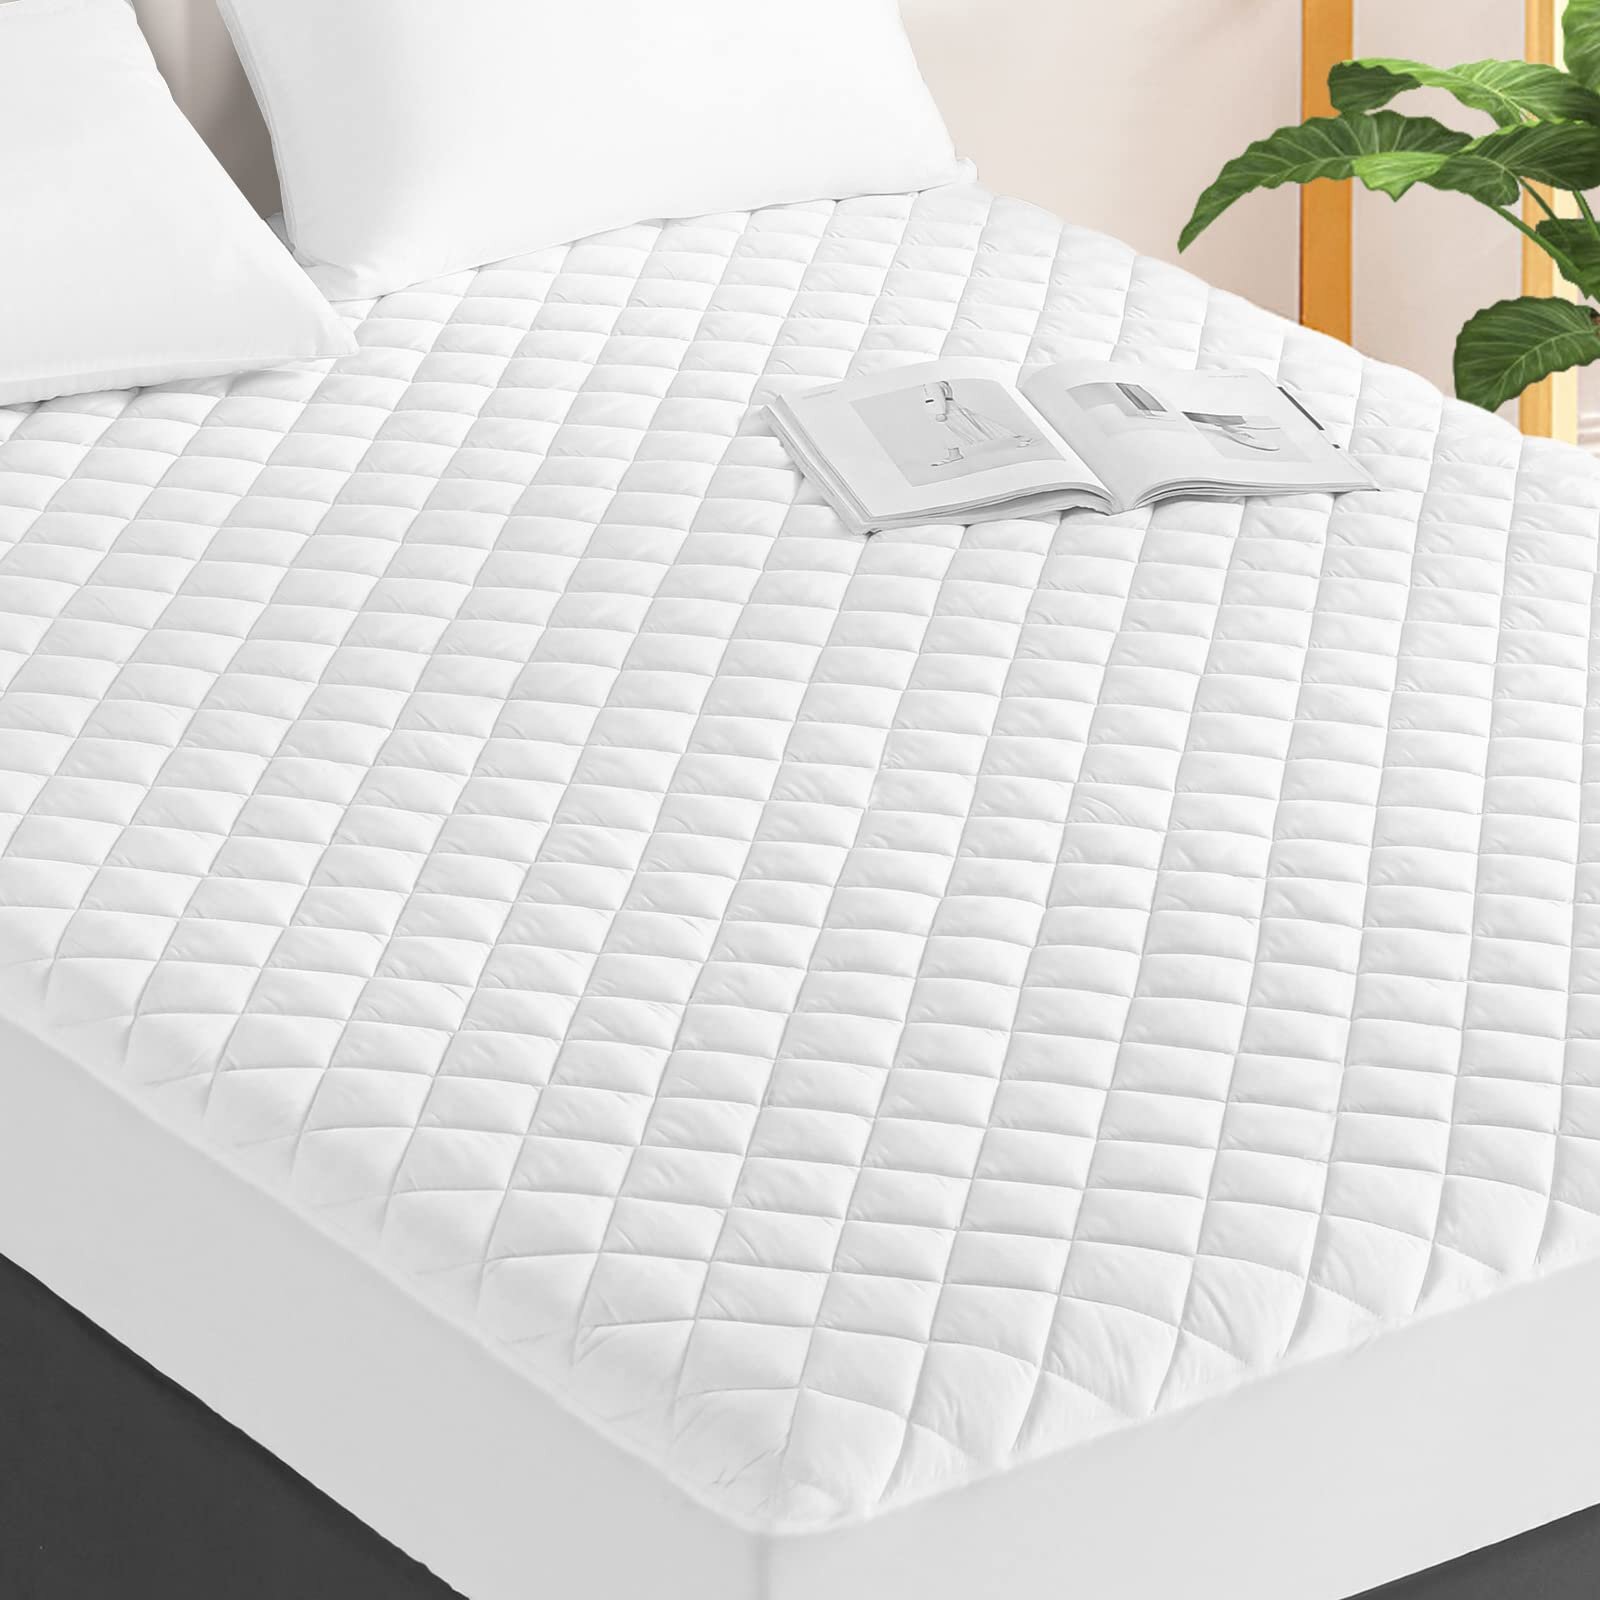 KING SIZE EXTRA DEEP ANTI ALLERGY QUILTED MATTRESS PROTECTOR FITTED BED COVER 